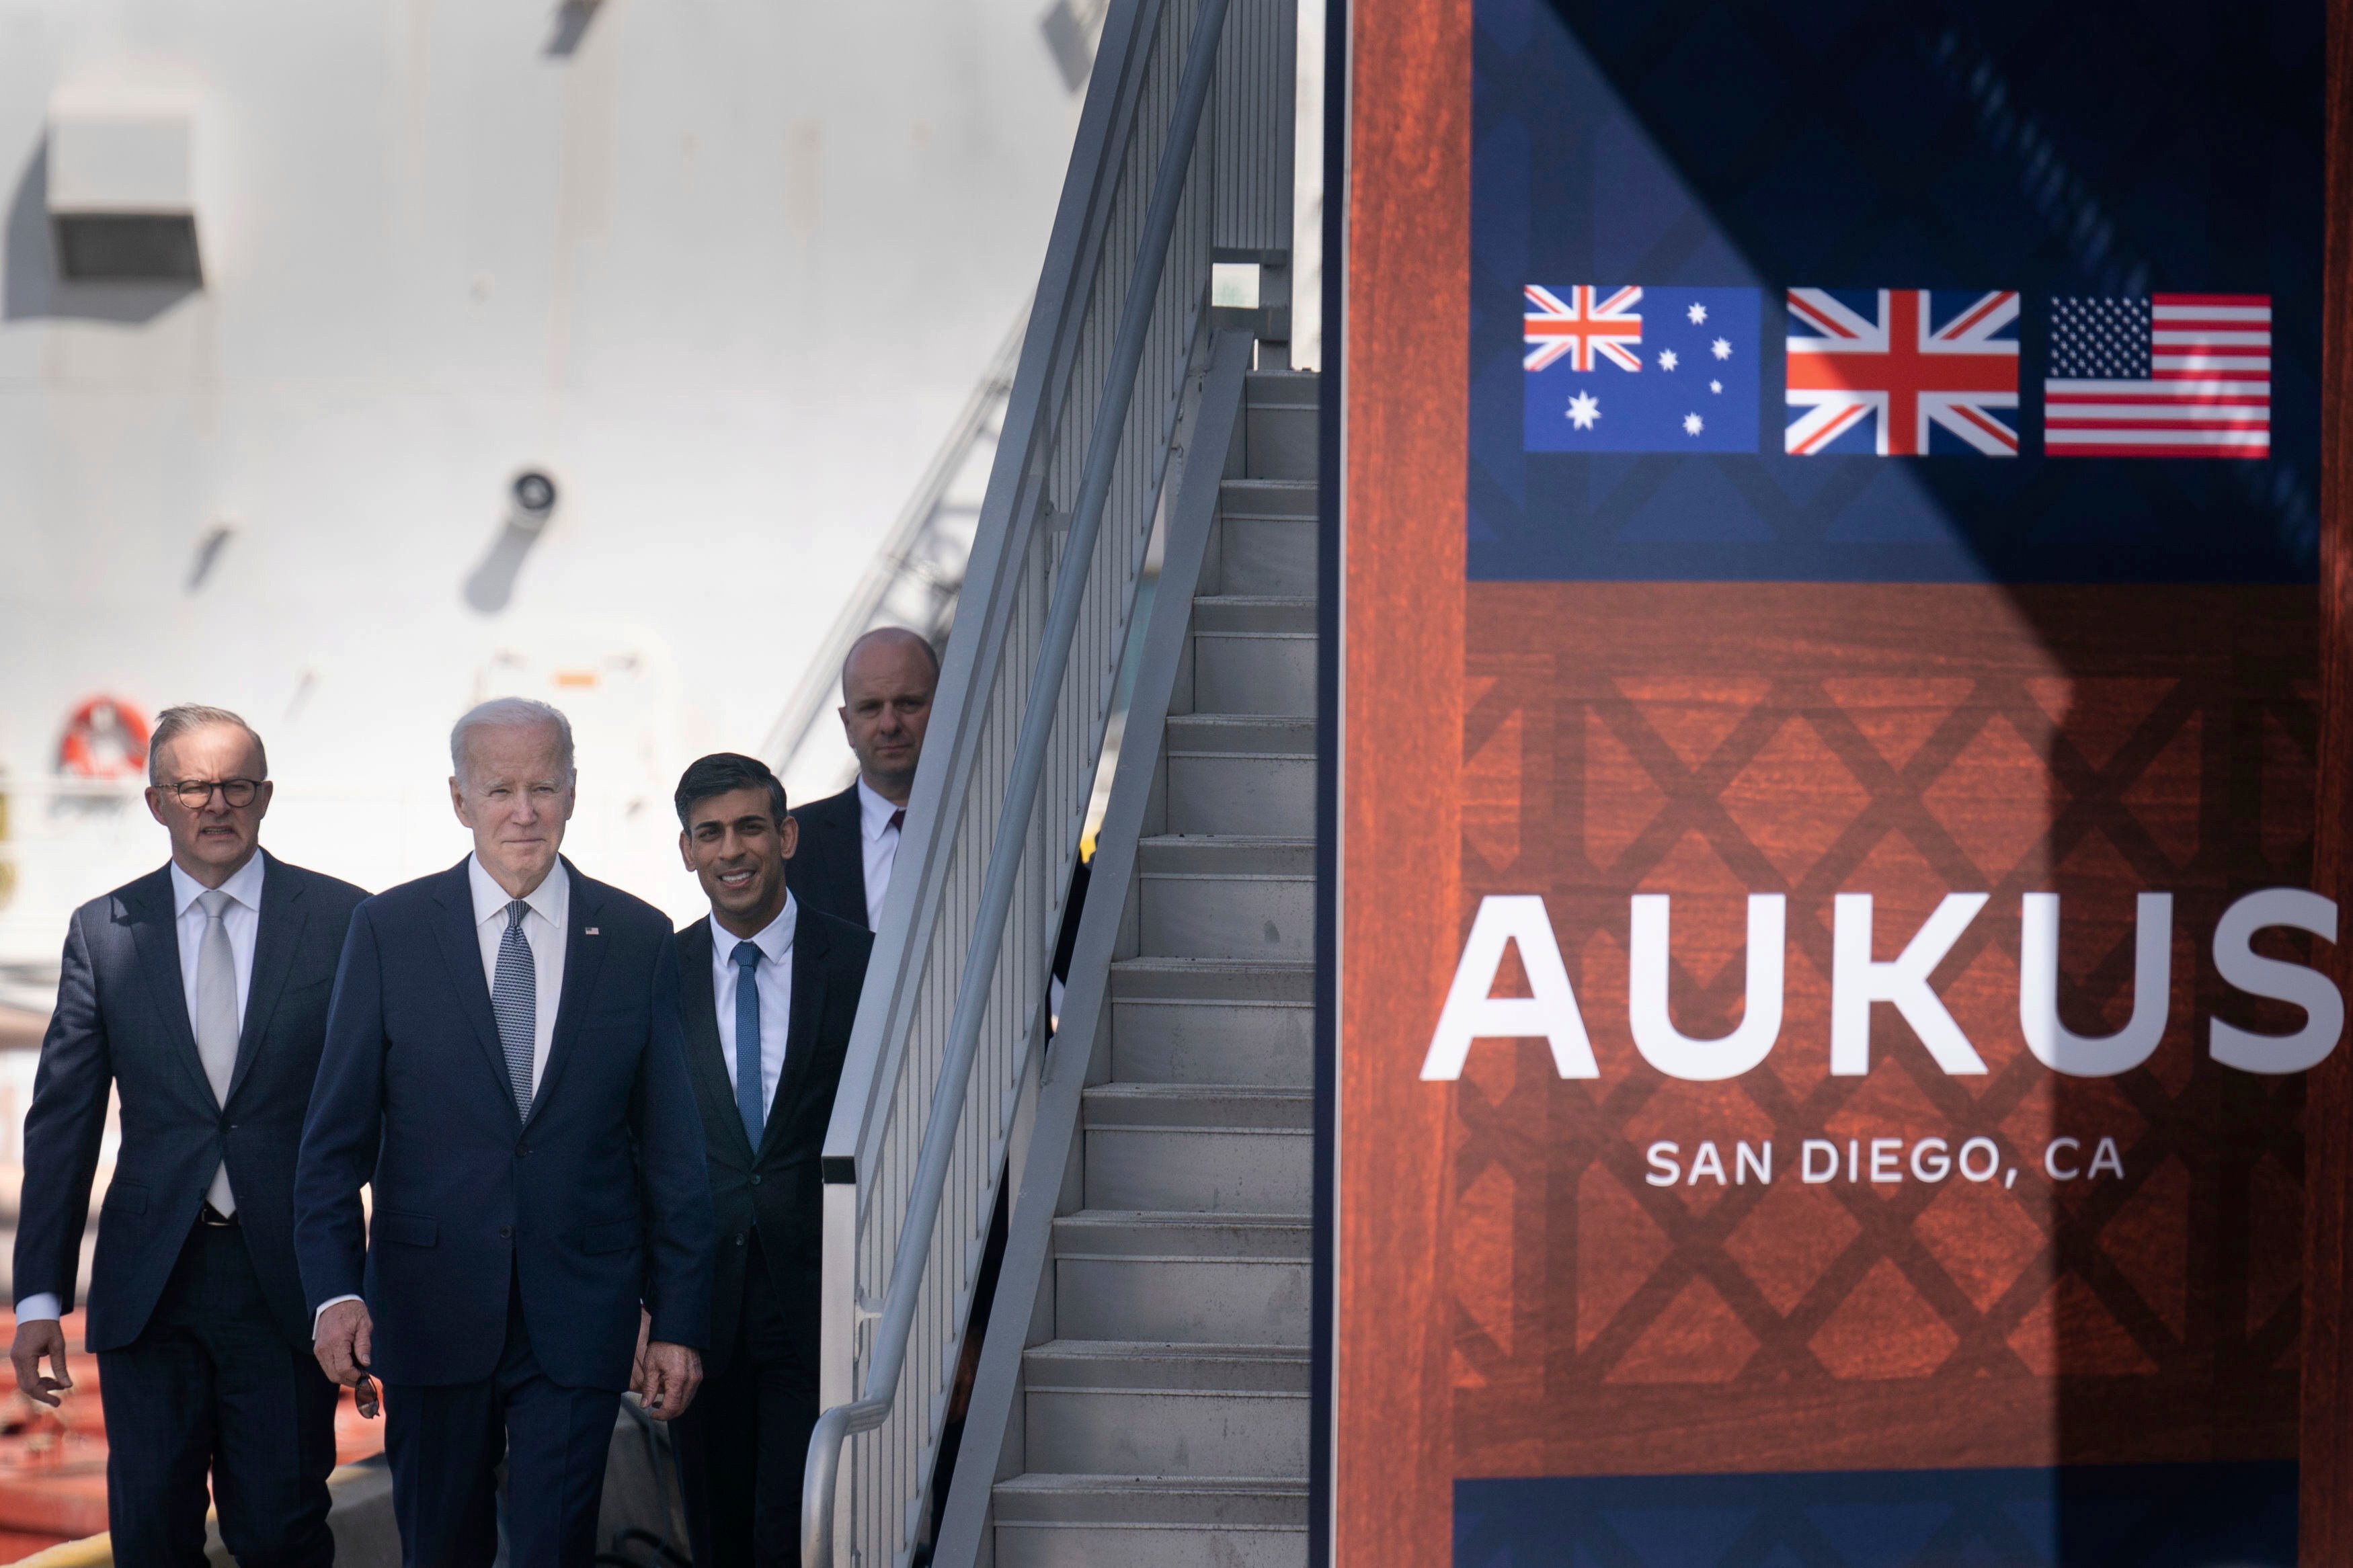 Australia’s PM Anthony Albanese, US President Joe Biden and British PM Rishi Sunak arrive for a press conference about Aukus on March 13, 2023. Photo: AP